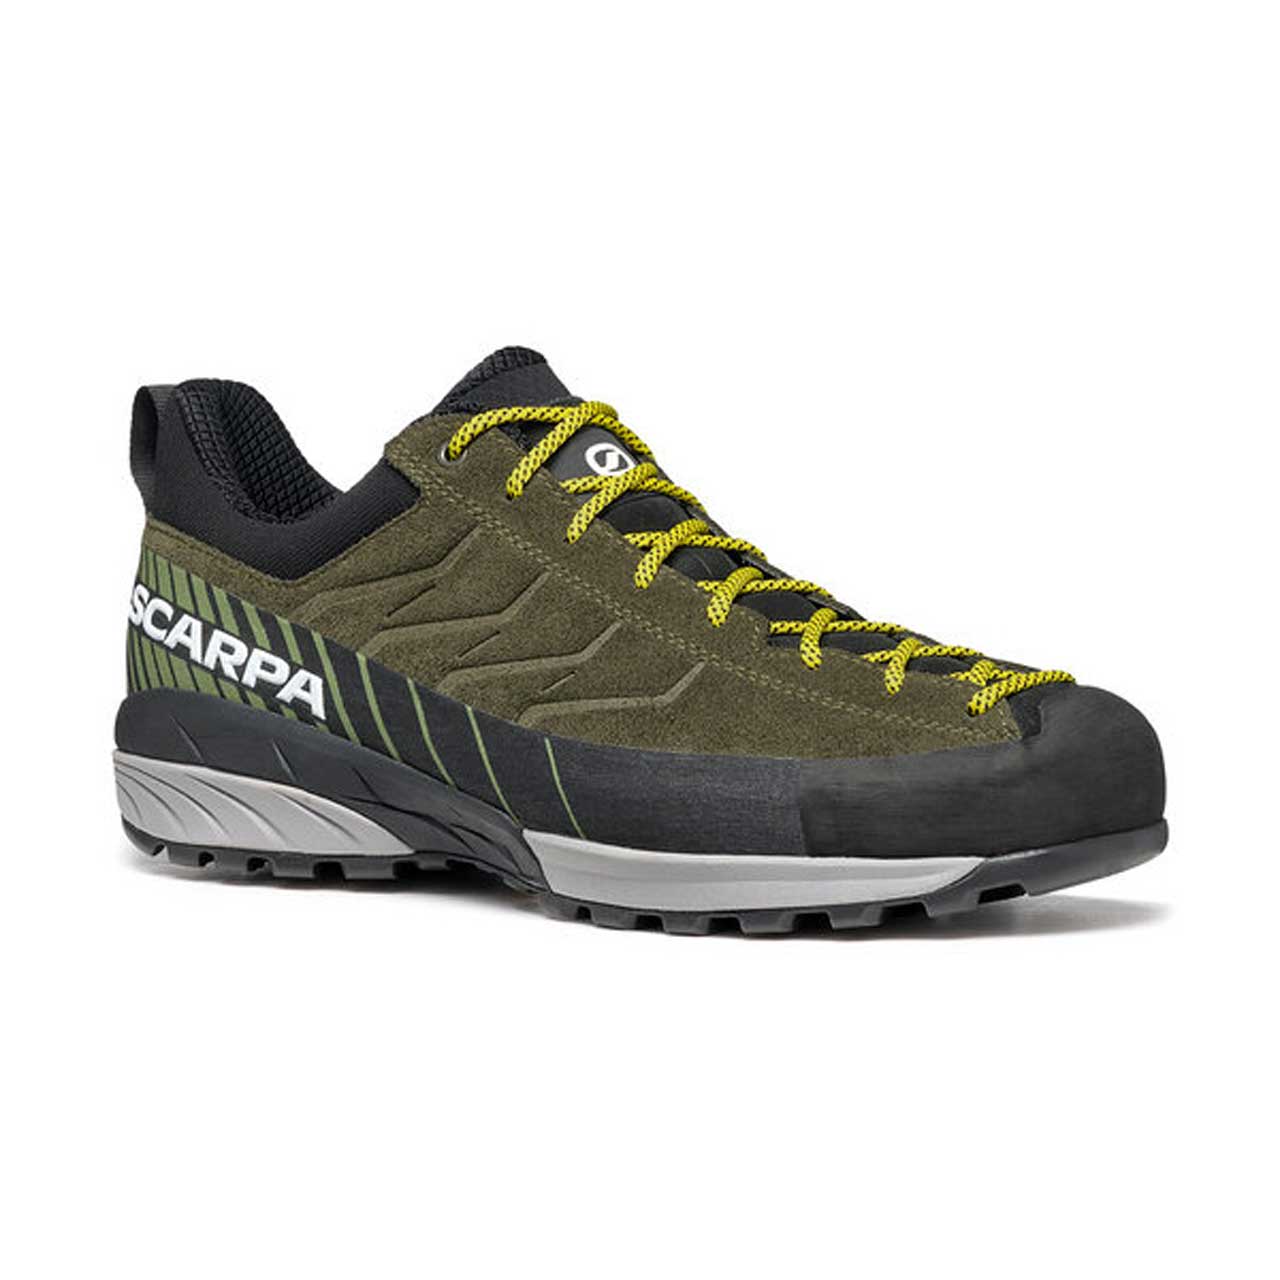 Scarpa Mescalito - Thyme Green/Forest, 43.5